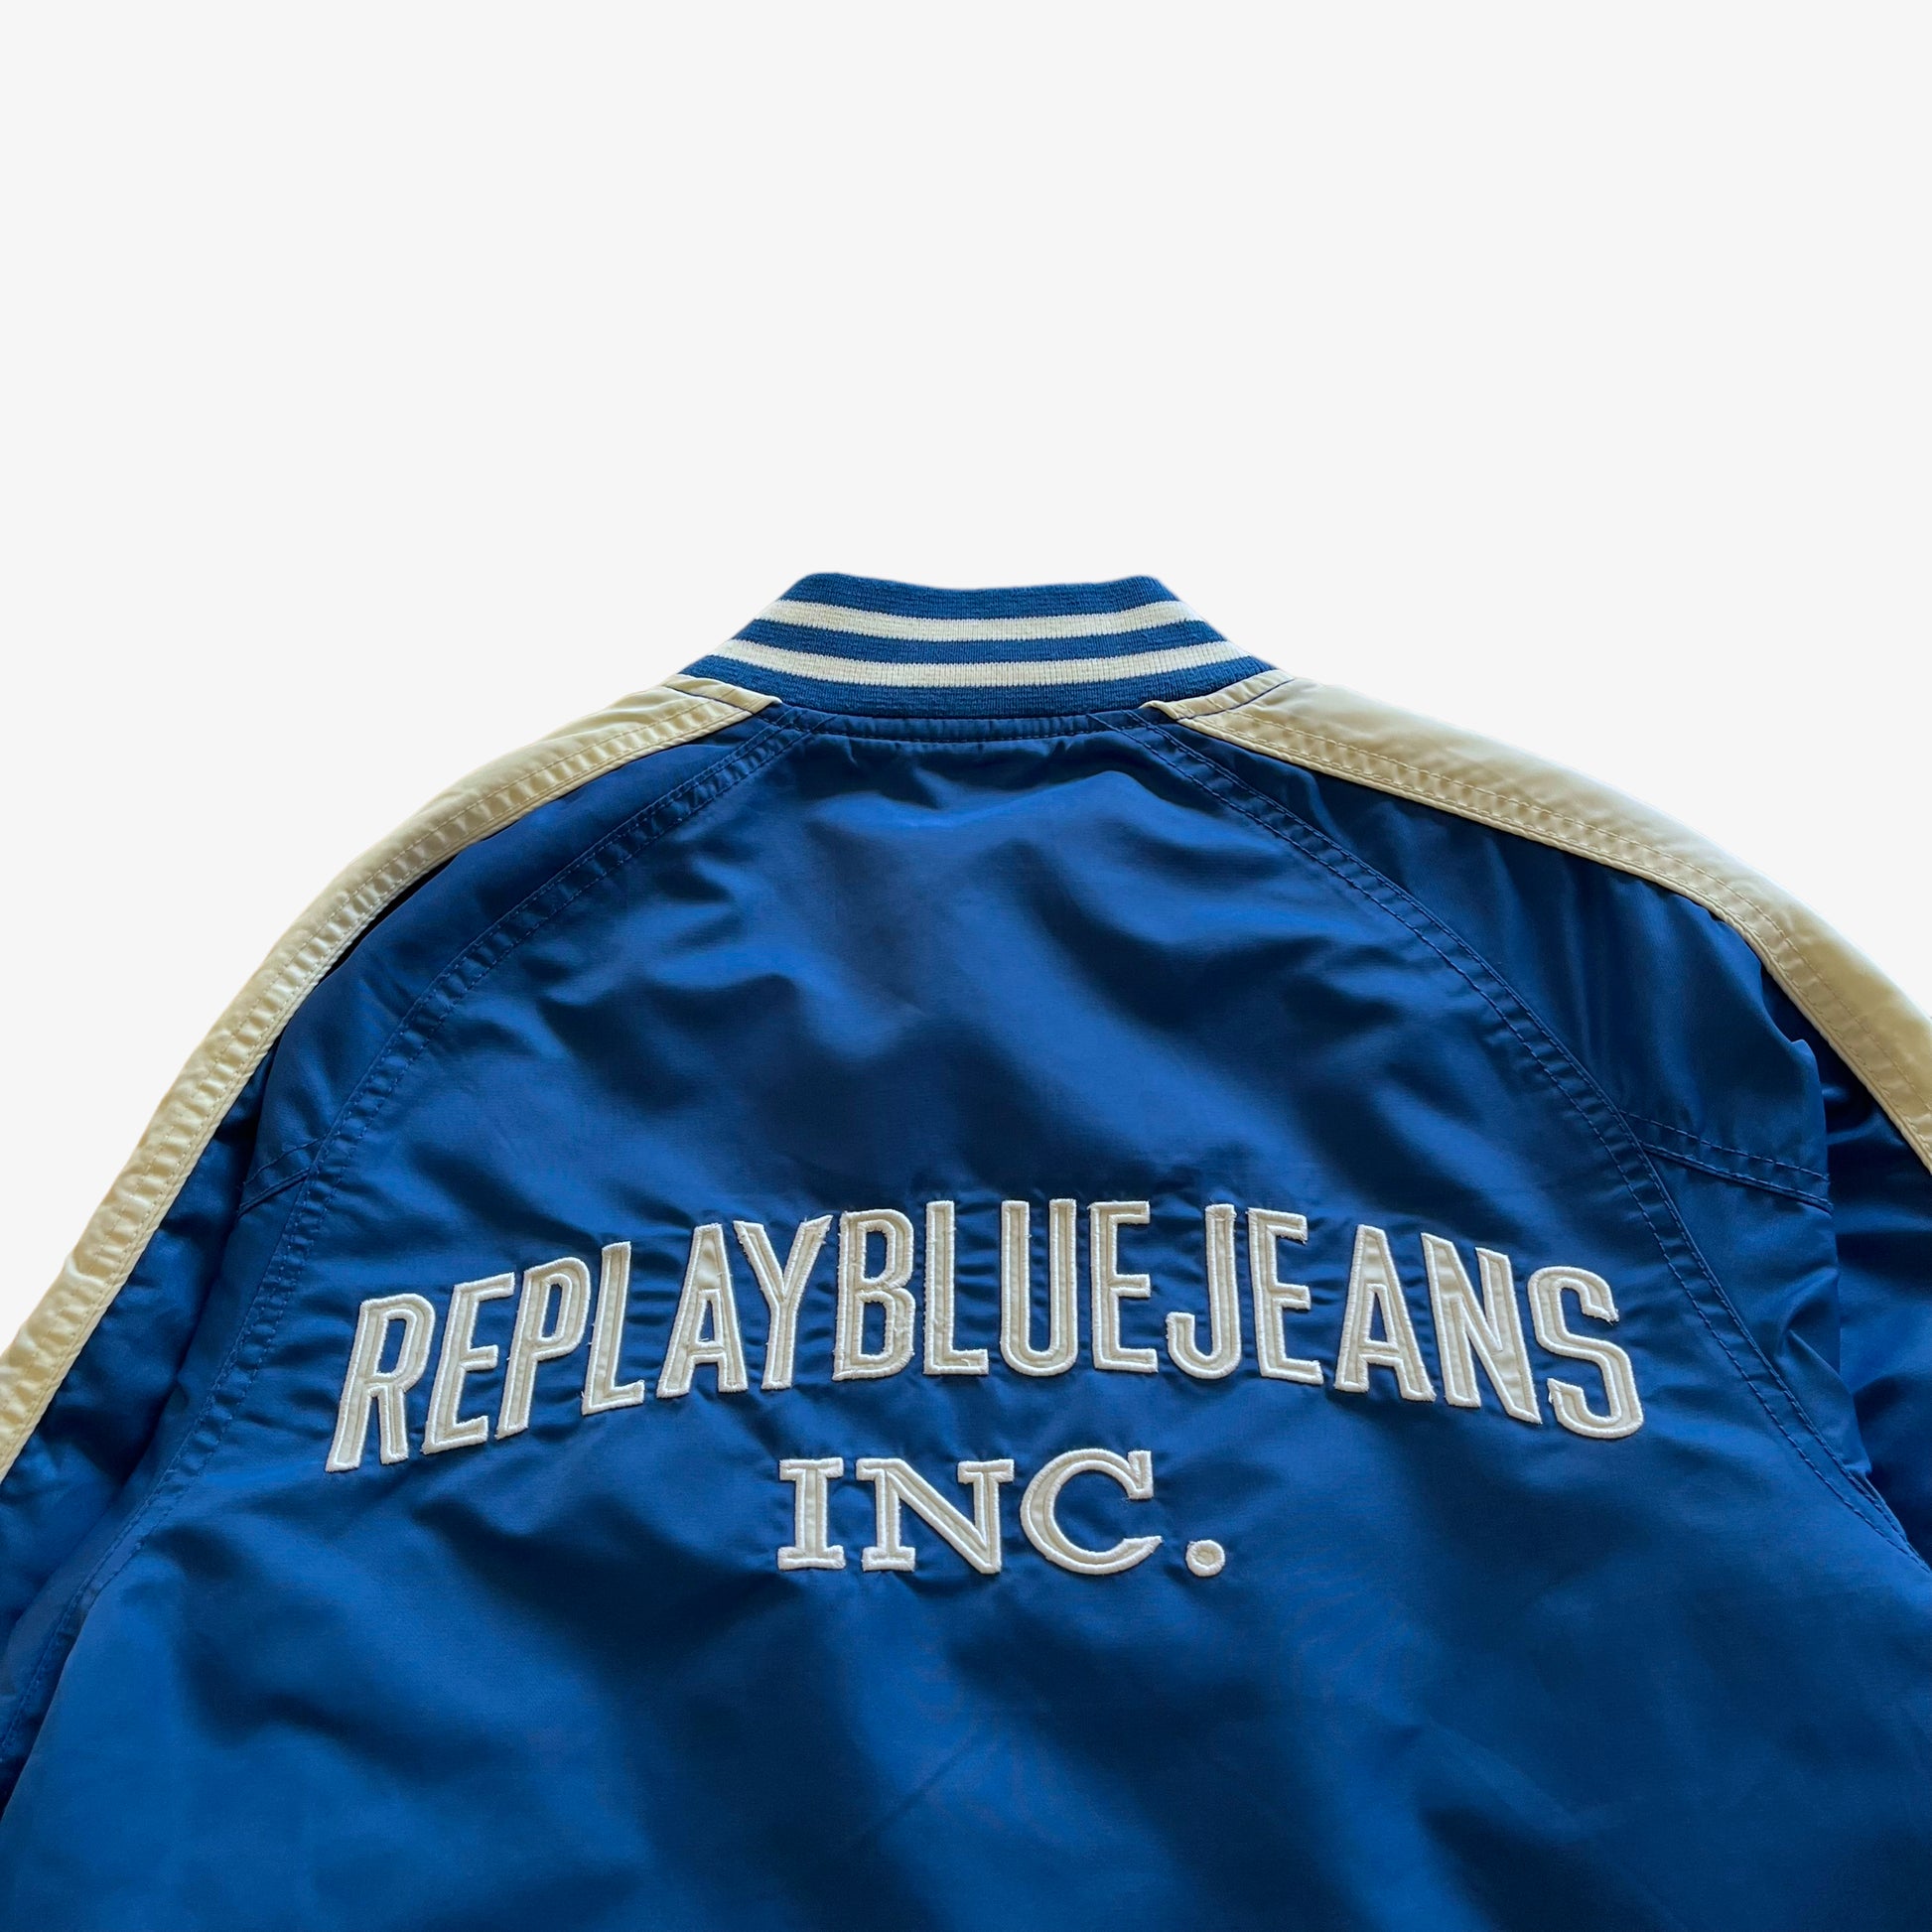 Vintage 90s Mens Replay Blue Jeans Inc Bomber Jacket With Back Spell Out Embroidered - Casspios Dream